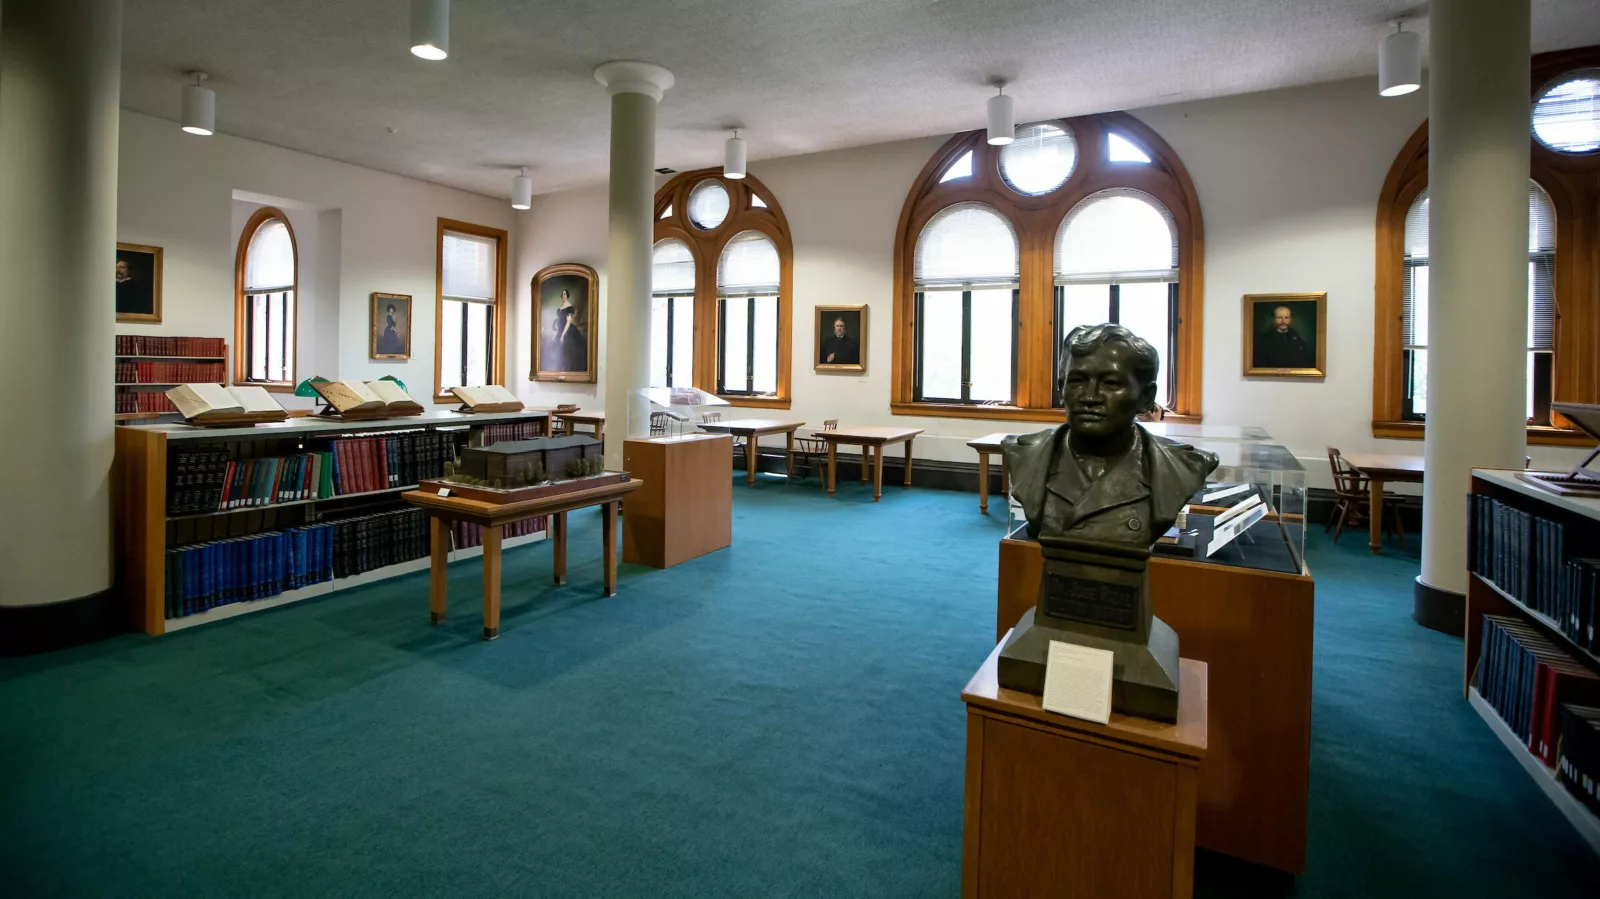 A bust of Filipino hero Jose Rizal appears in a study area in the Newberry Library.